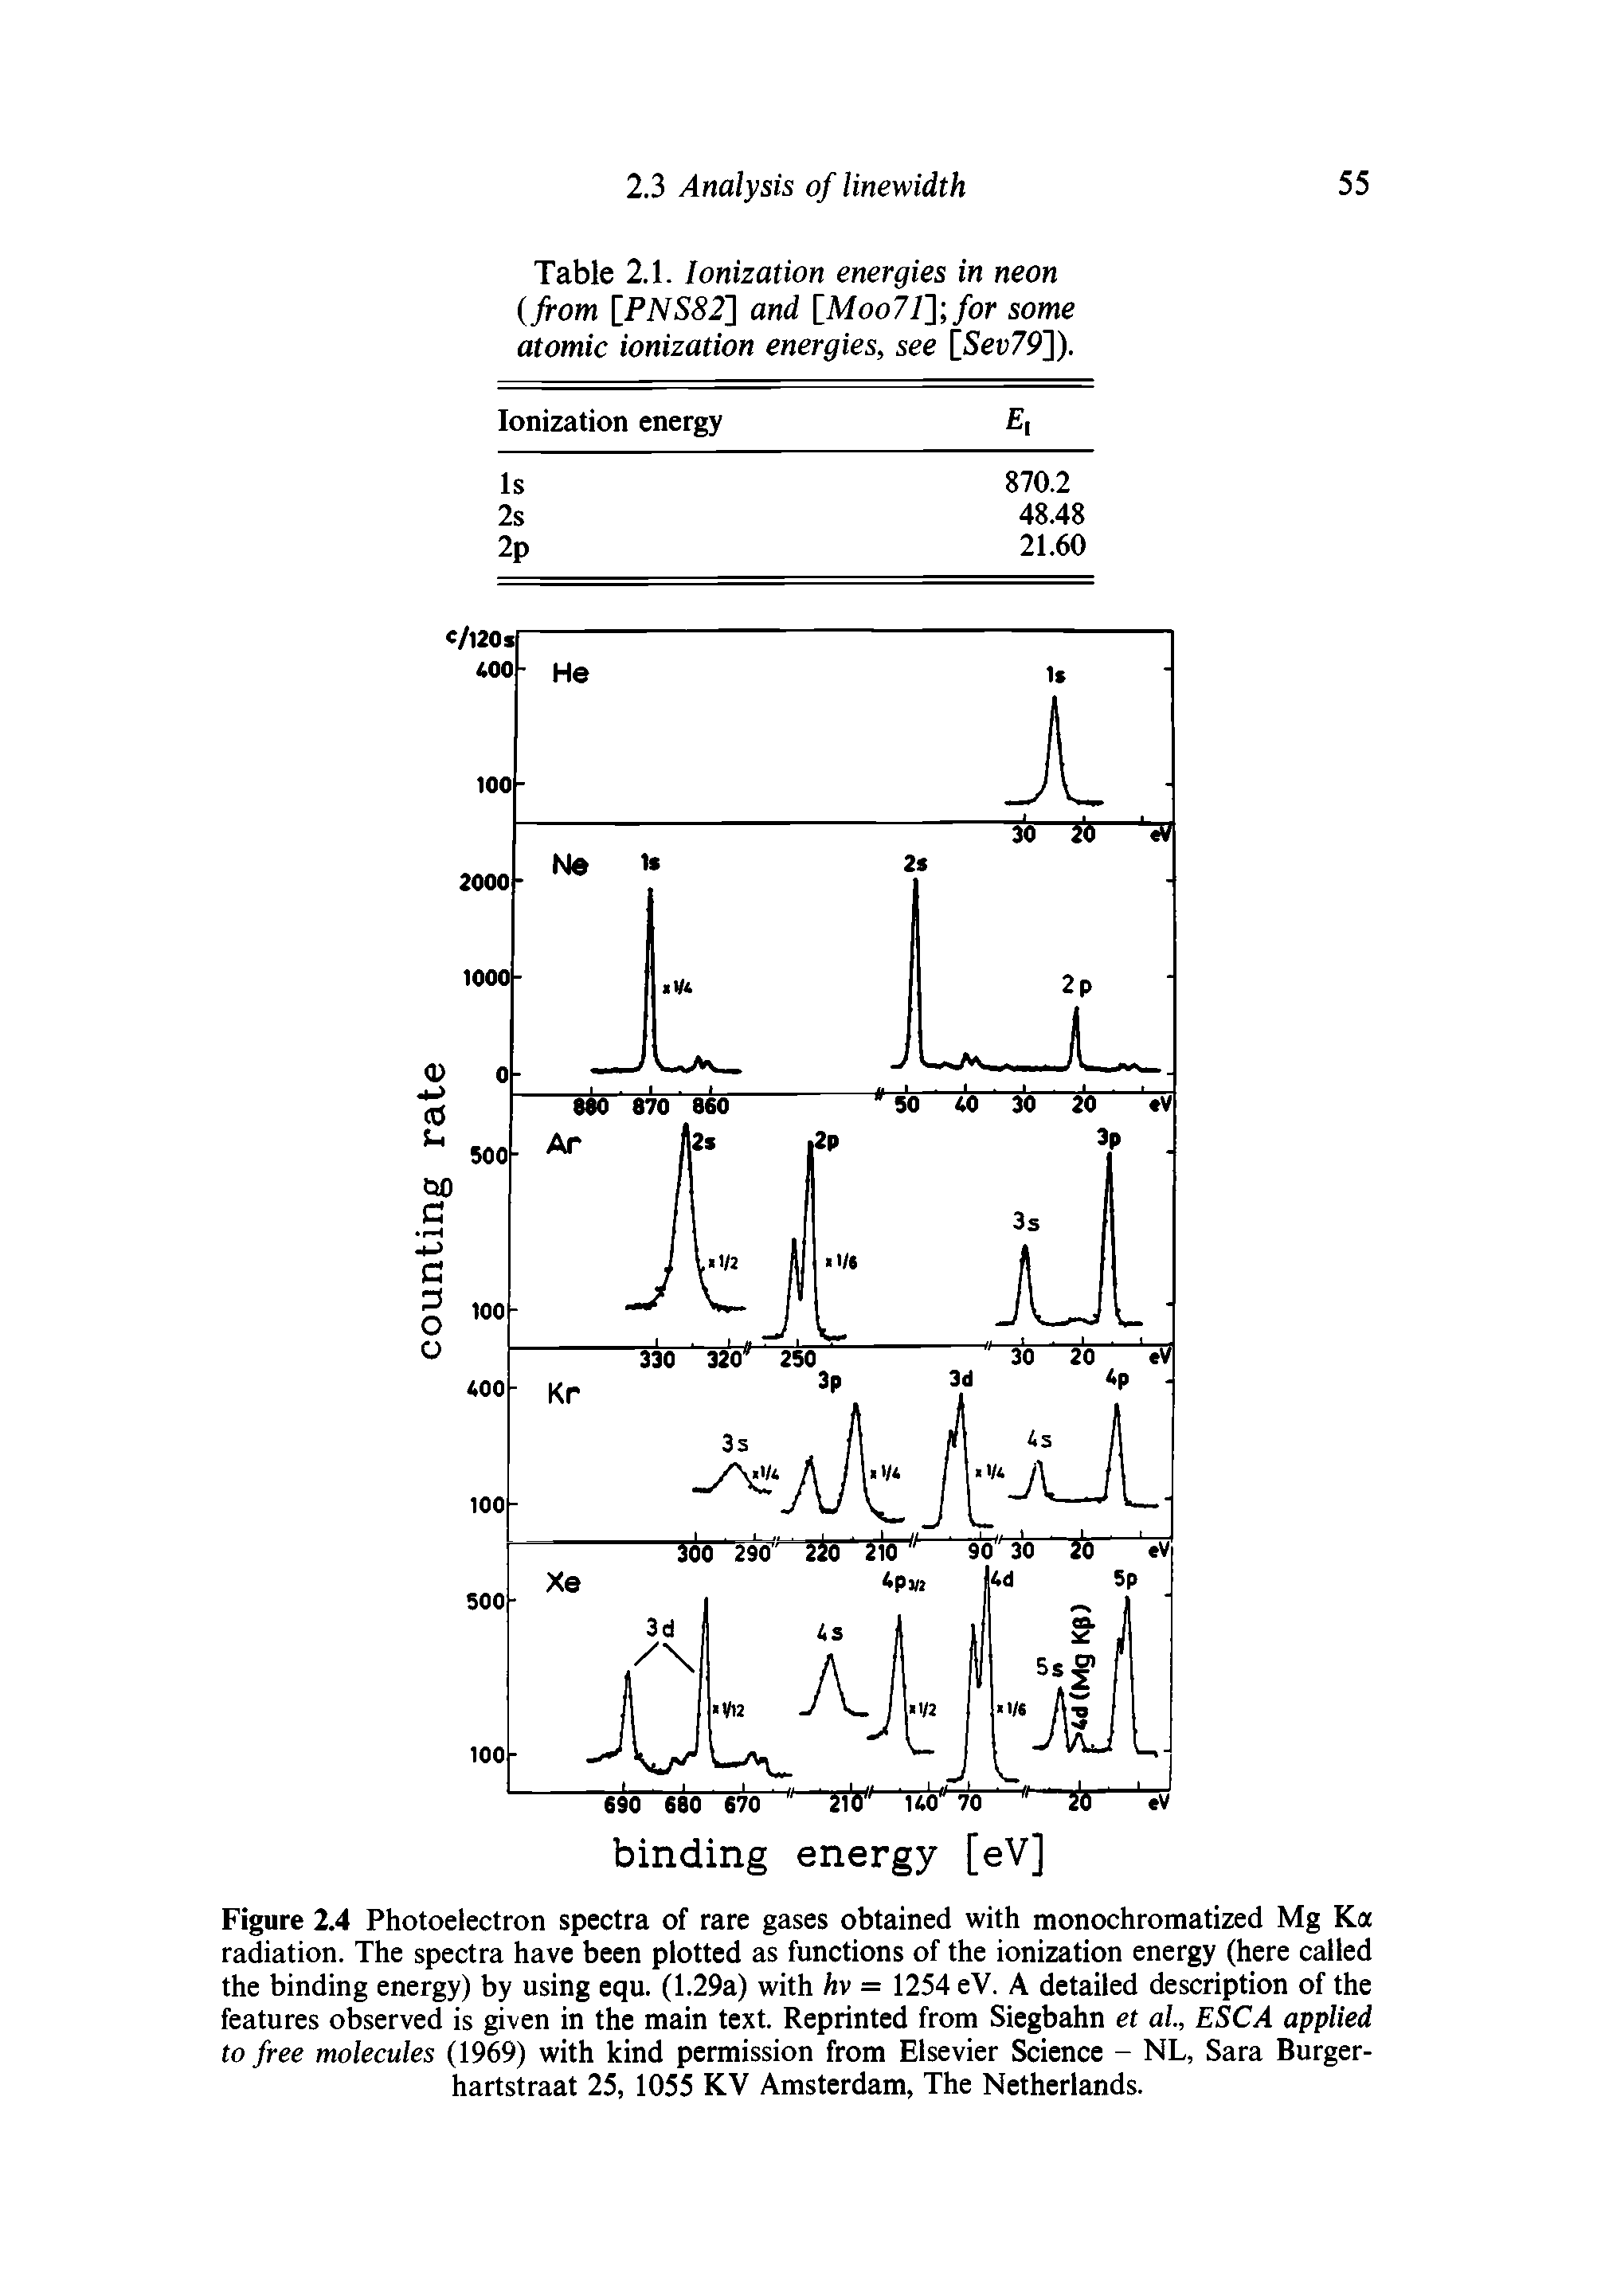 Figure 2.4 Photoelectron spectra of rare gases obtained with monochromatized Mg Ka radiation. The spectra have been plotted as functions of the ionization energy (here called the binding energy) by using equ. (1.29a) with hv = 1254 eV. A detailed description of the features observed is given in the main text. Reprinted from Siegbahn et al, ESCA applied to free molecules (1969) with kind permission from Elsevier Science - NL, Sara Burger-hartstraat 25, 1055 KV Amsterdam, The Netherlands.